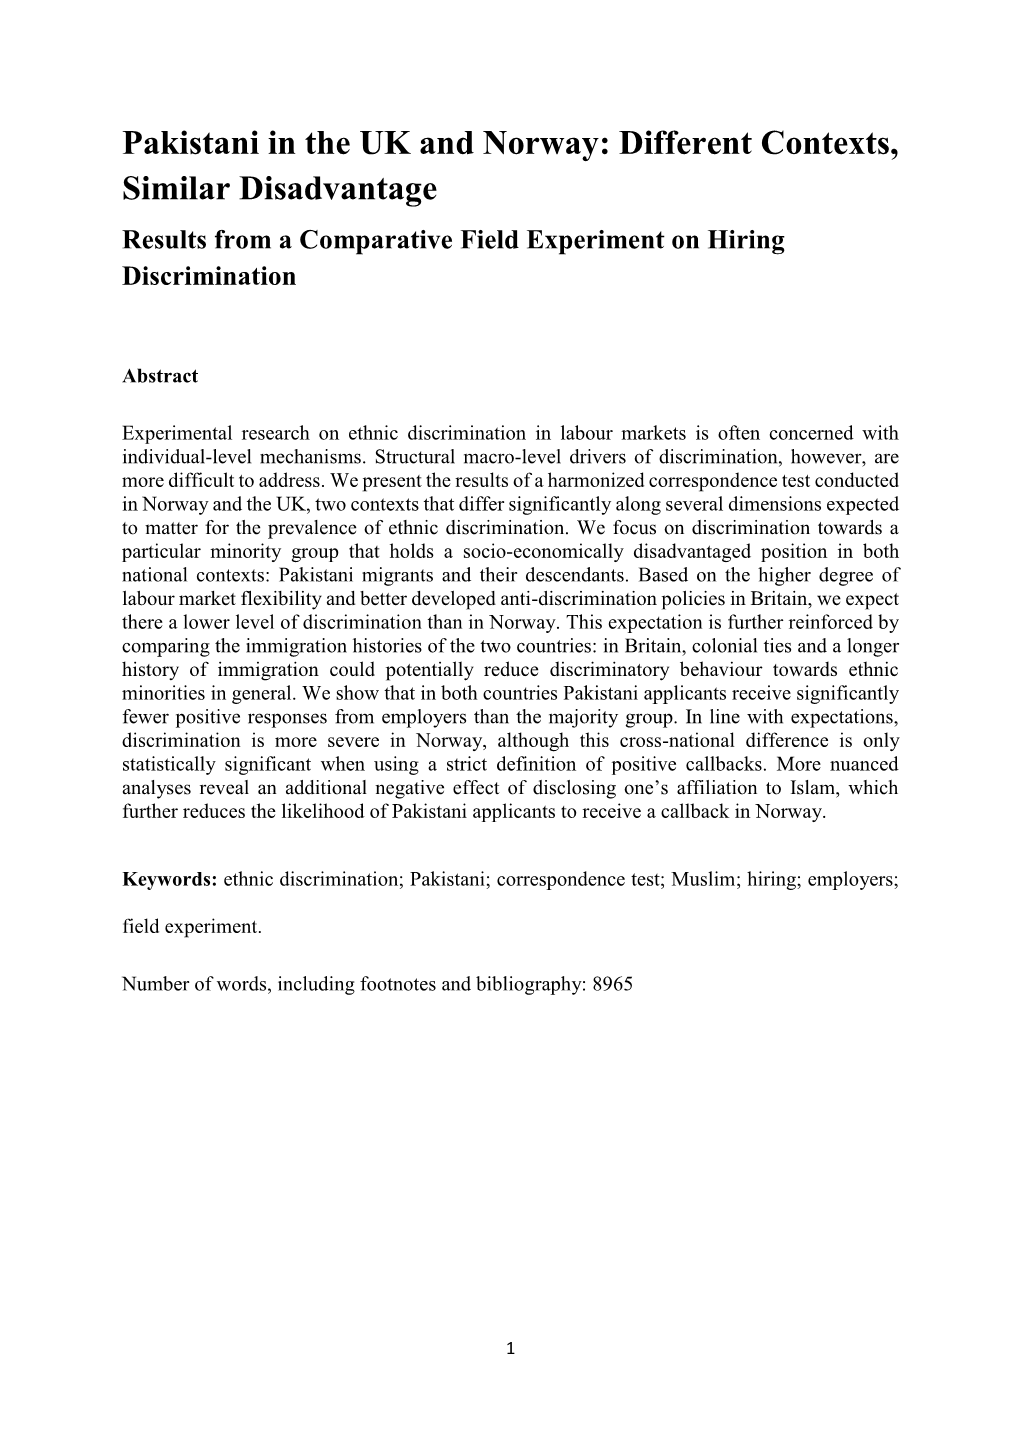 Pakistani in the UK and Norway: Different Contexts, Similar Disadvantage Results from a Comparative Field Experiment on Hiring Discrimination